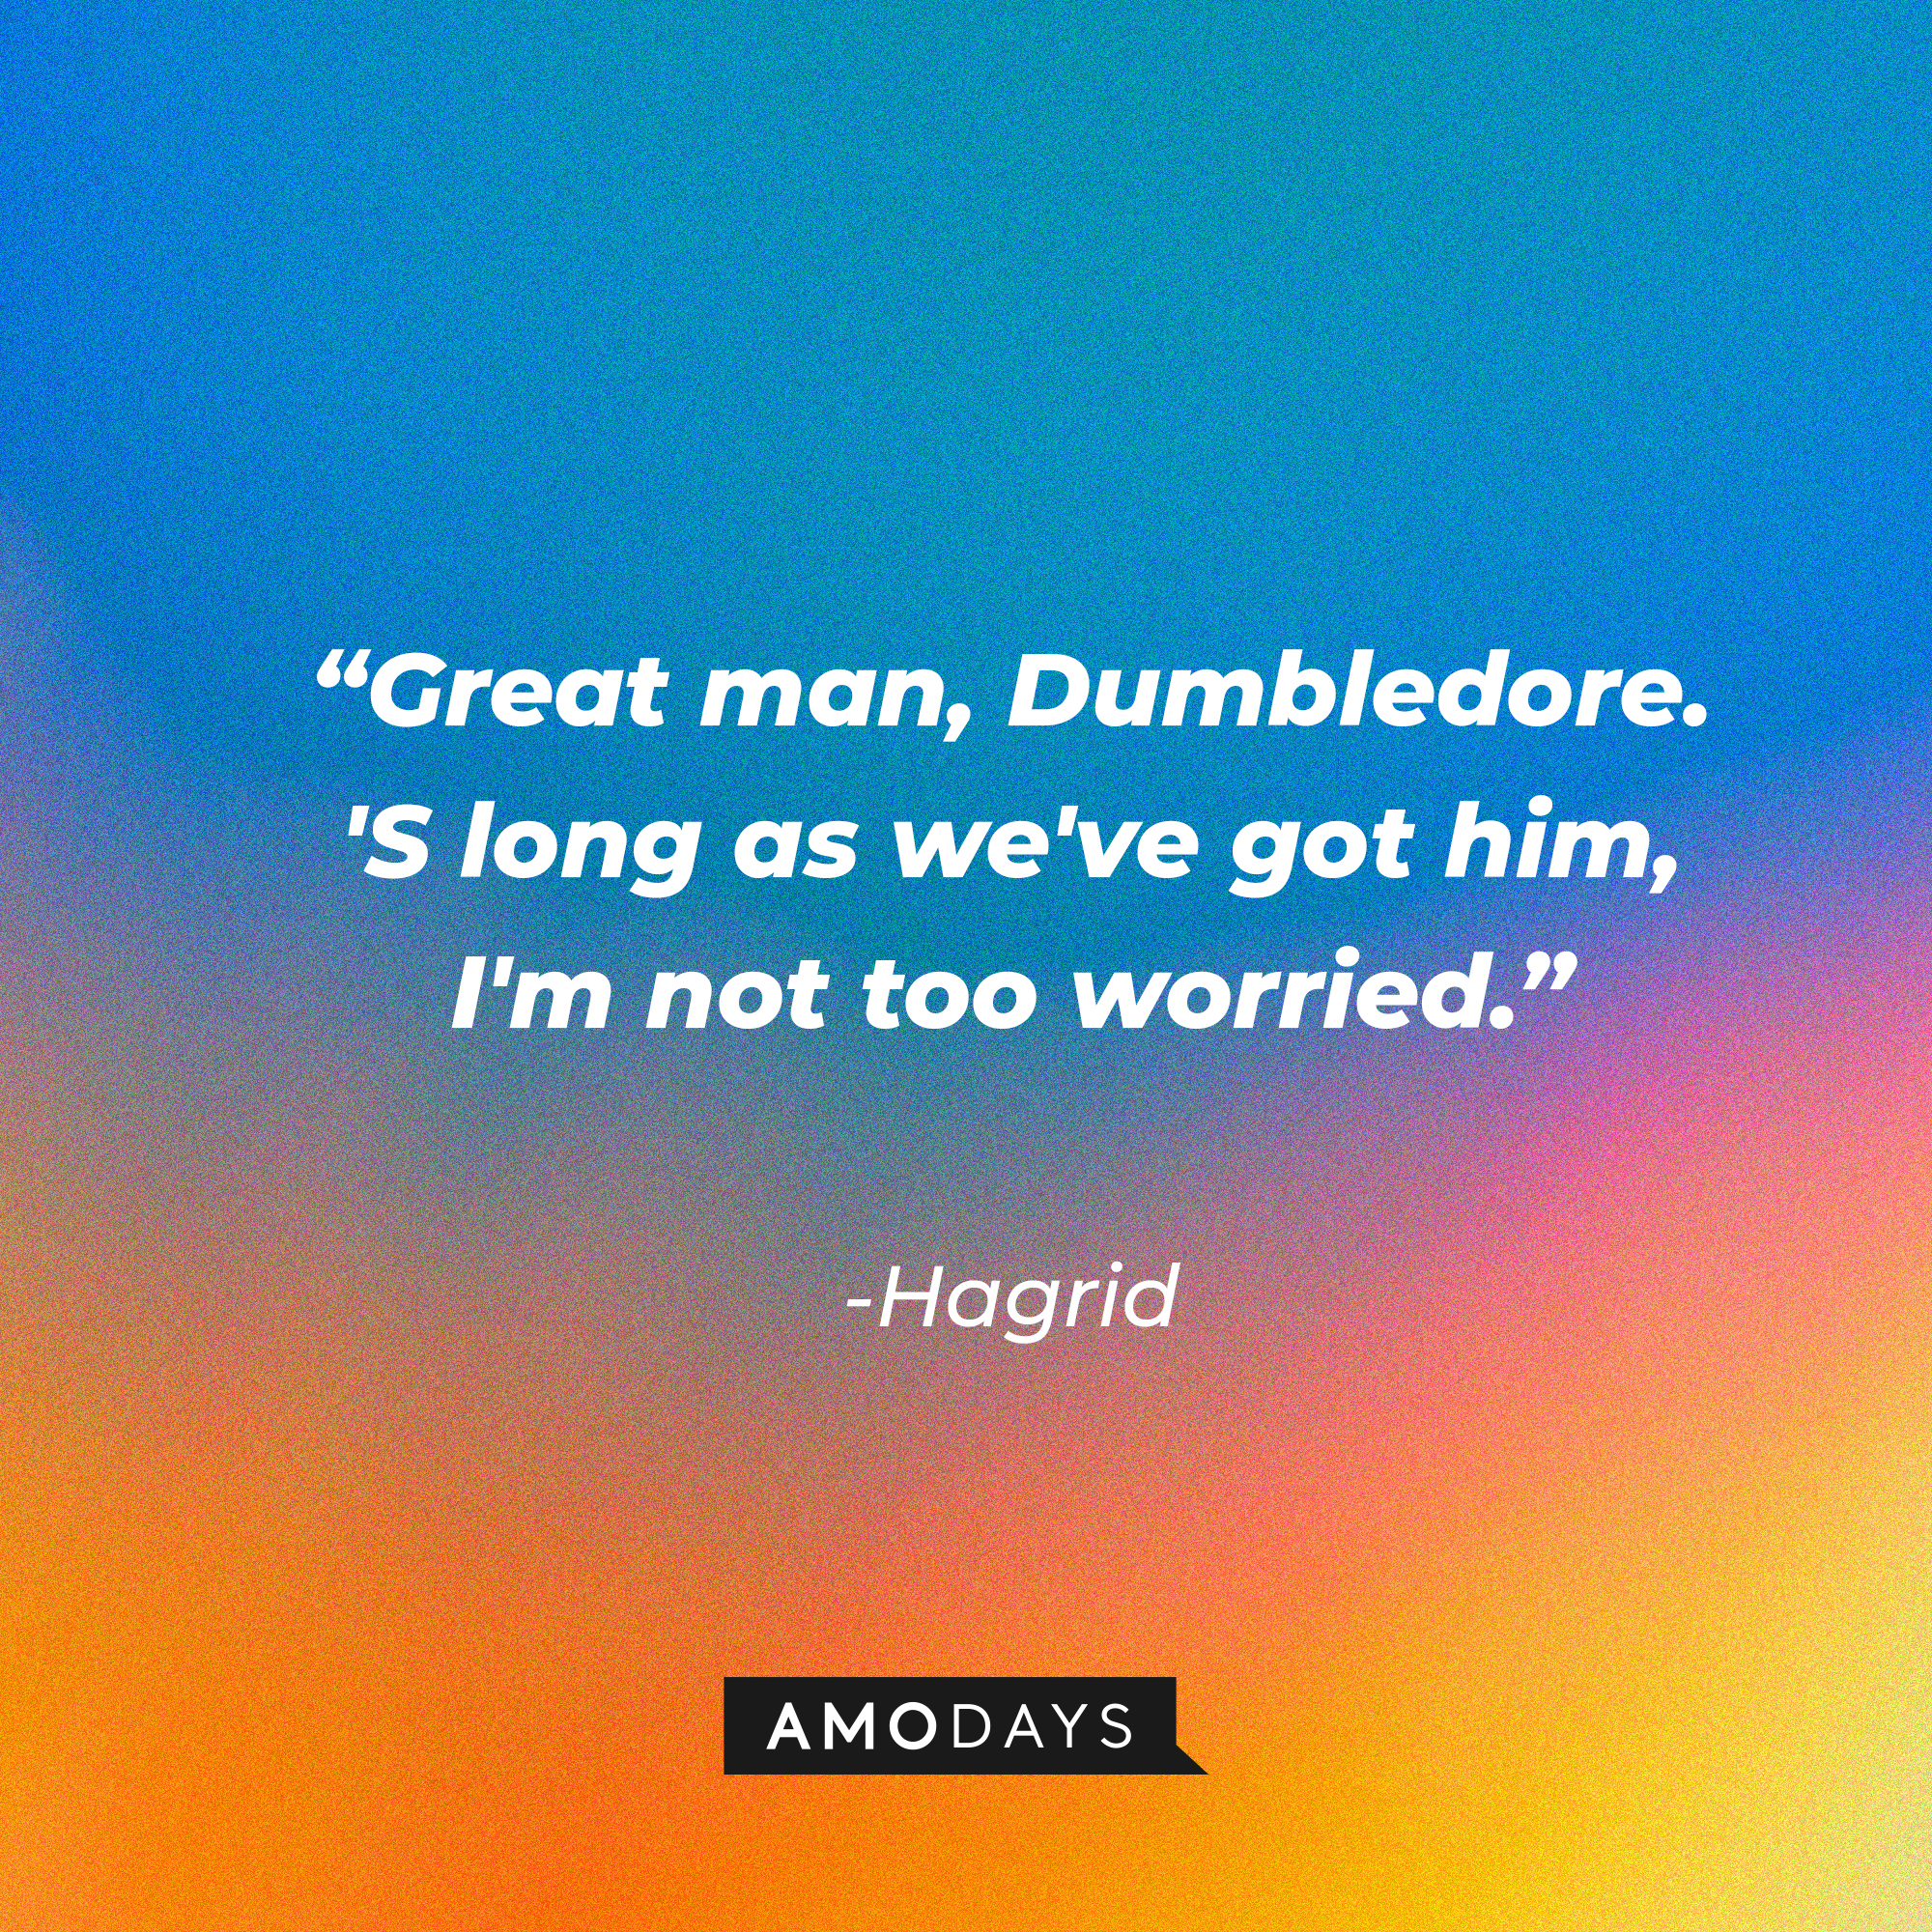 Hagrid's quote: "Great man, Dumbledore. 'S long as we've got him, I'm not too worried." | Source: AmoDays